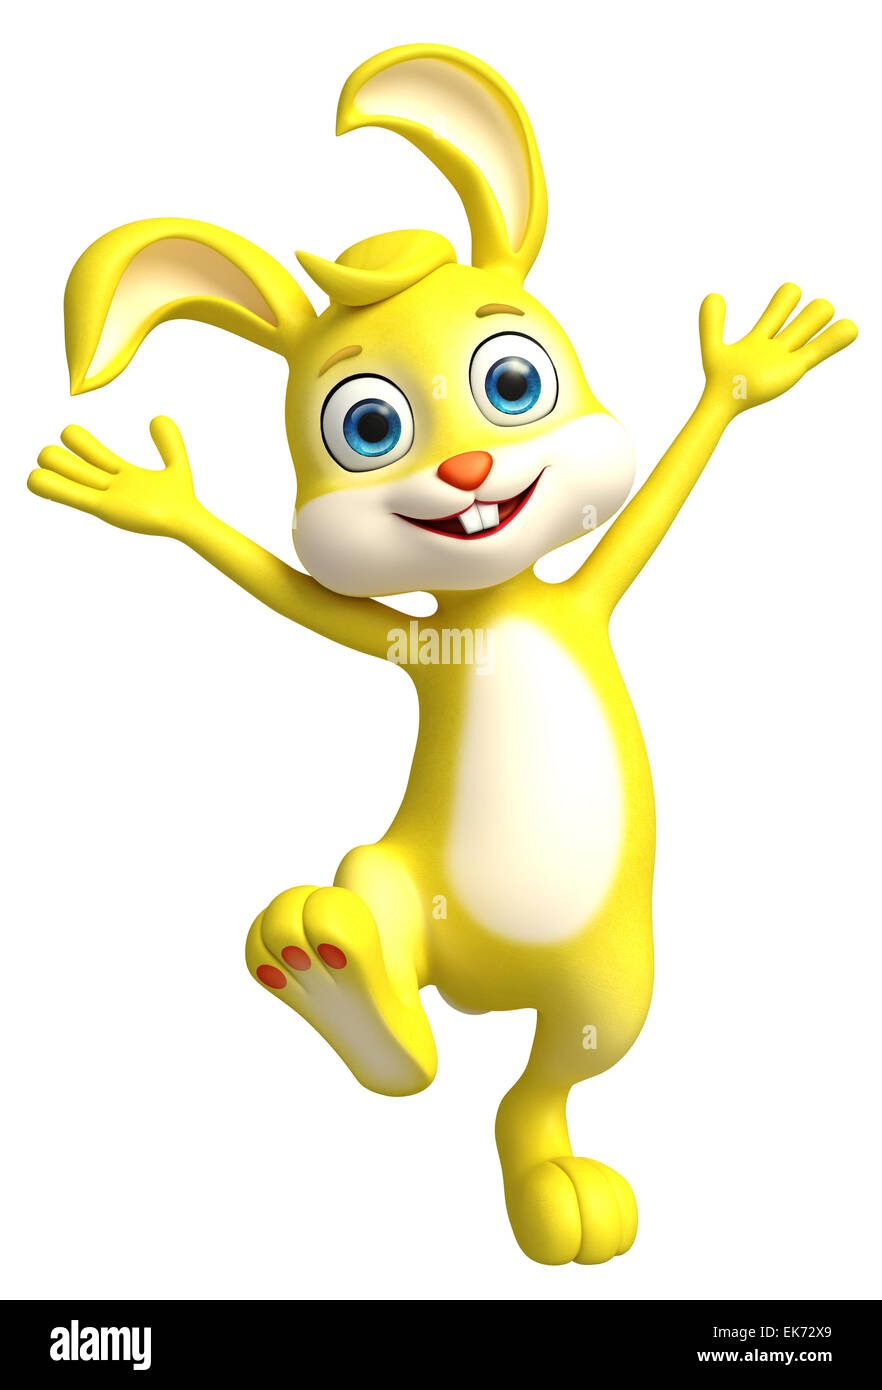 3D illustration of Easter bunny with funny pose Stock Photo - Alamy